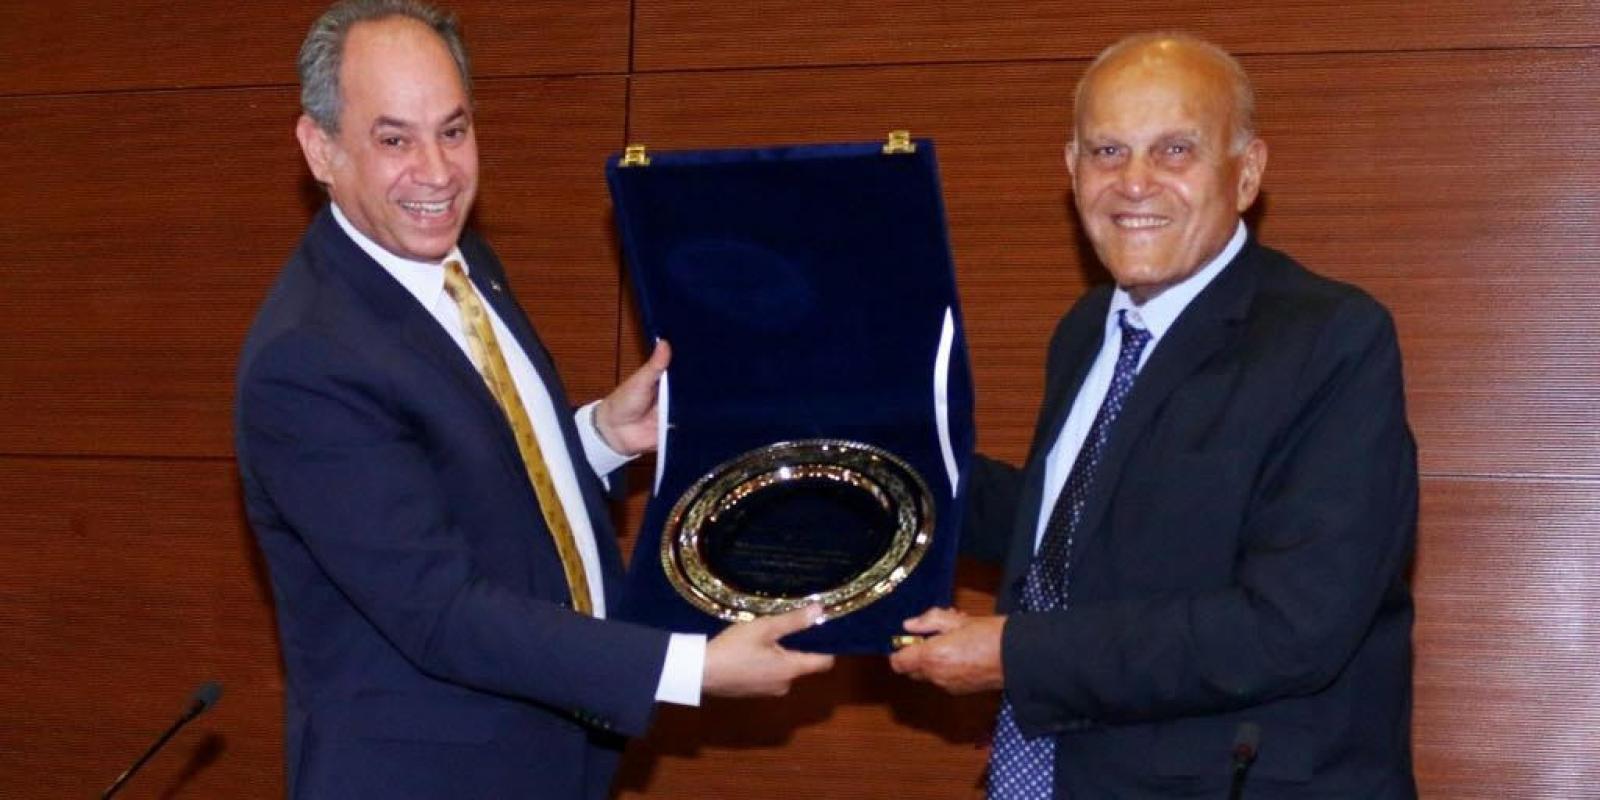 Provost Ehab Abdel-Rahman presented Professor Sir Magdi Yacoub with a silver plate in recognition of his "enduring commitment and remarkable impact in serving humanity"